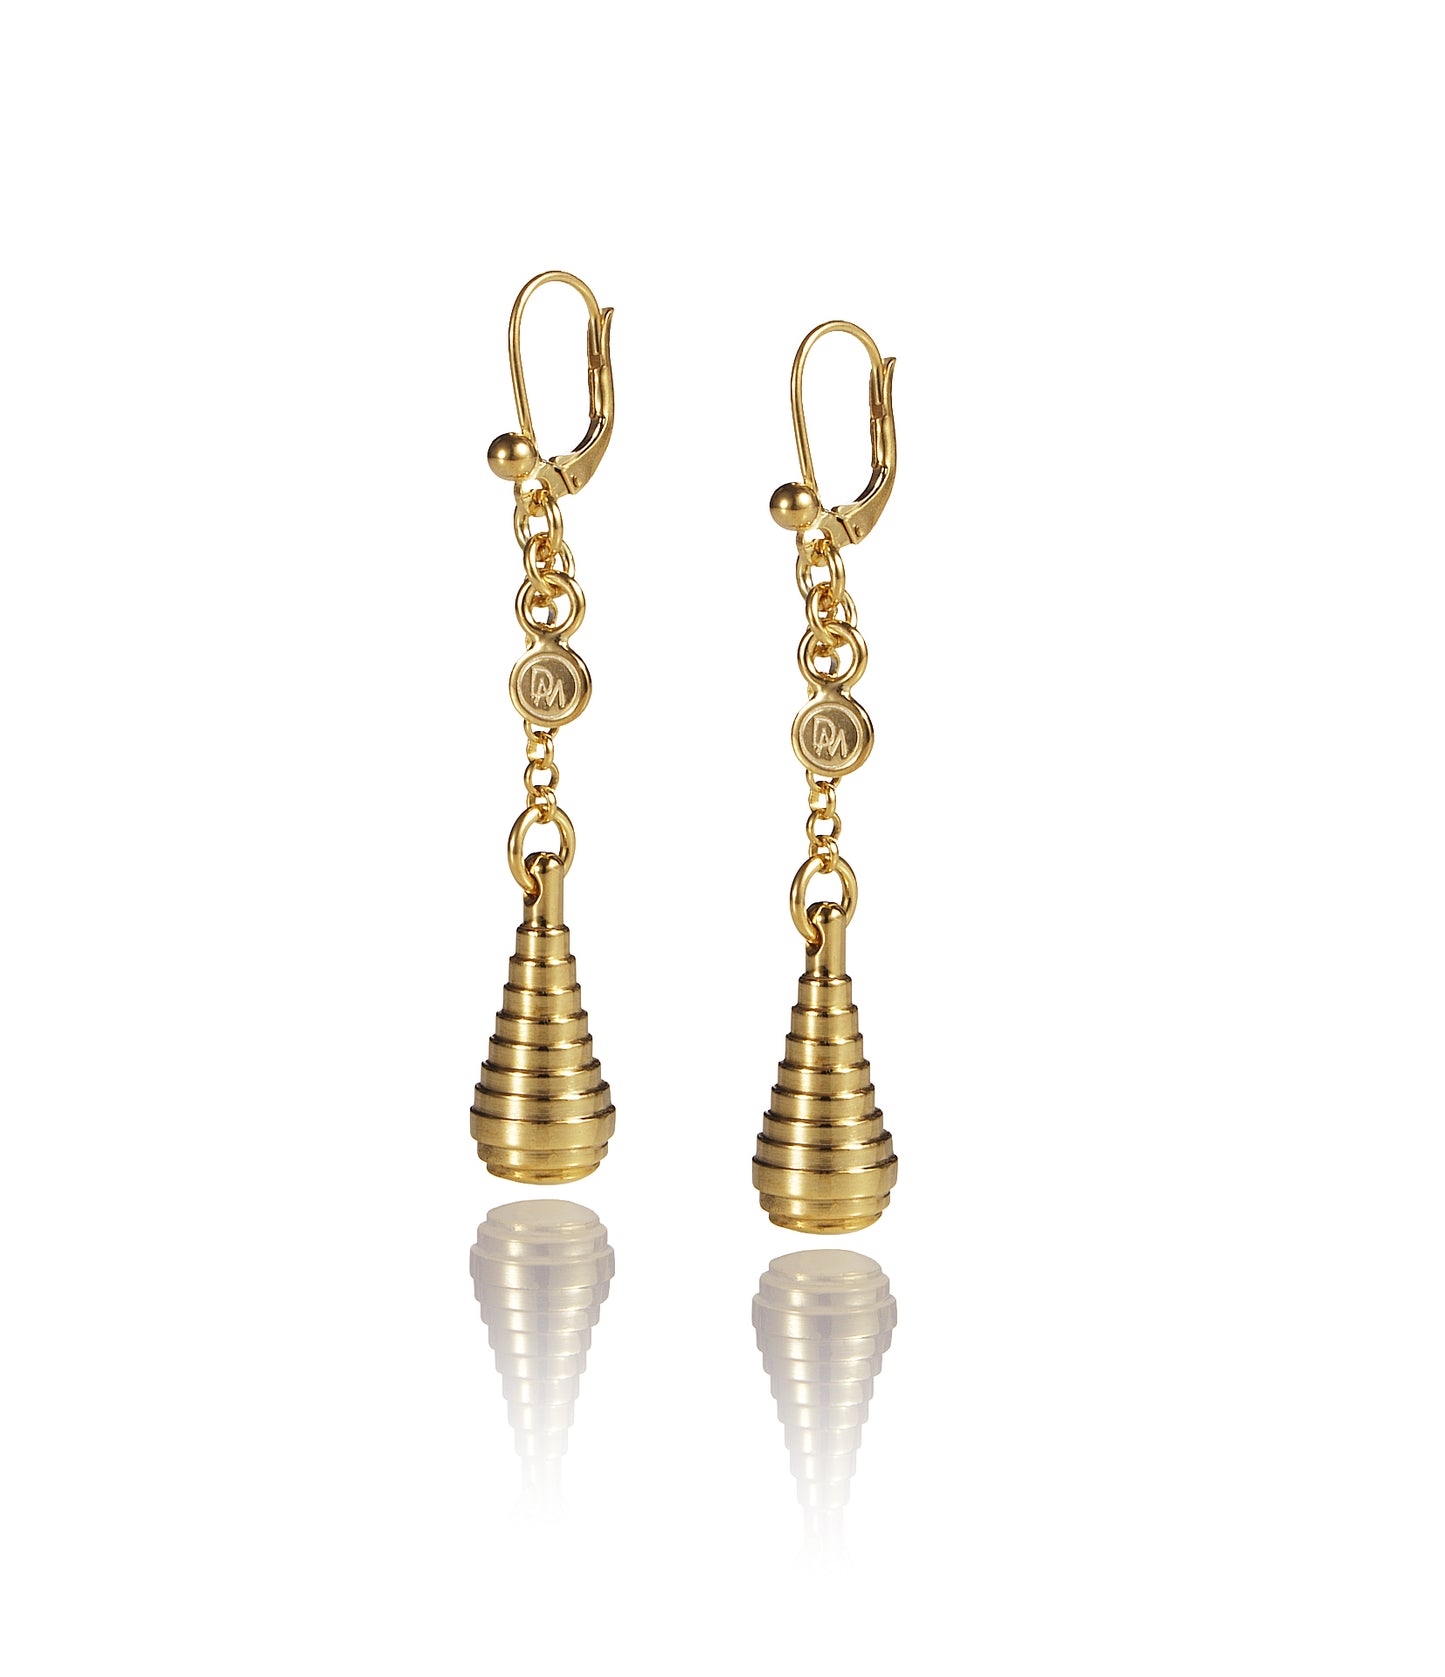 Popular and chic long earrings from Drop collection.  Material: 18 karat gold-plated silver.